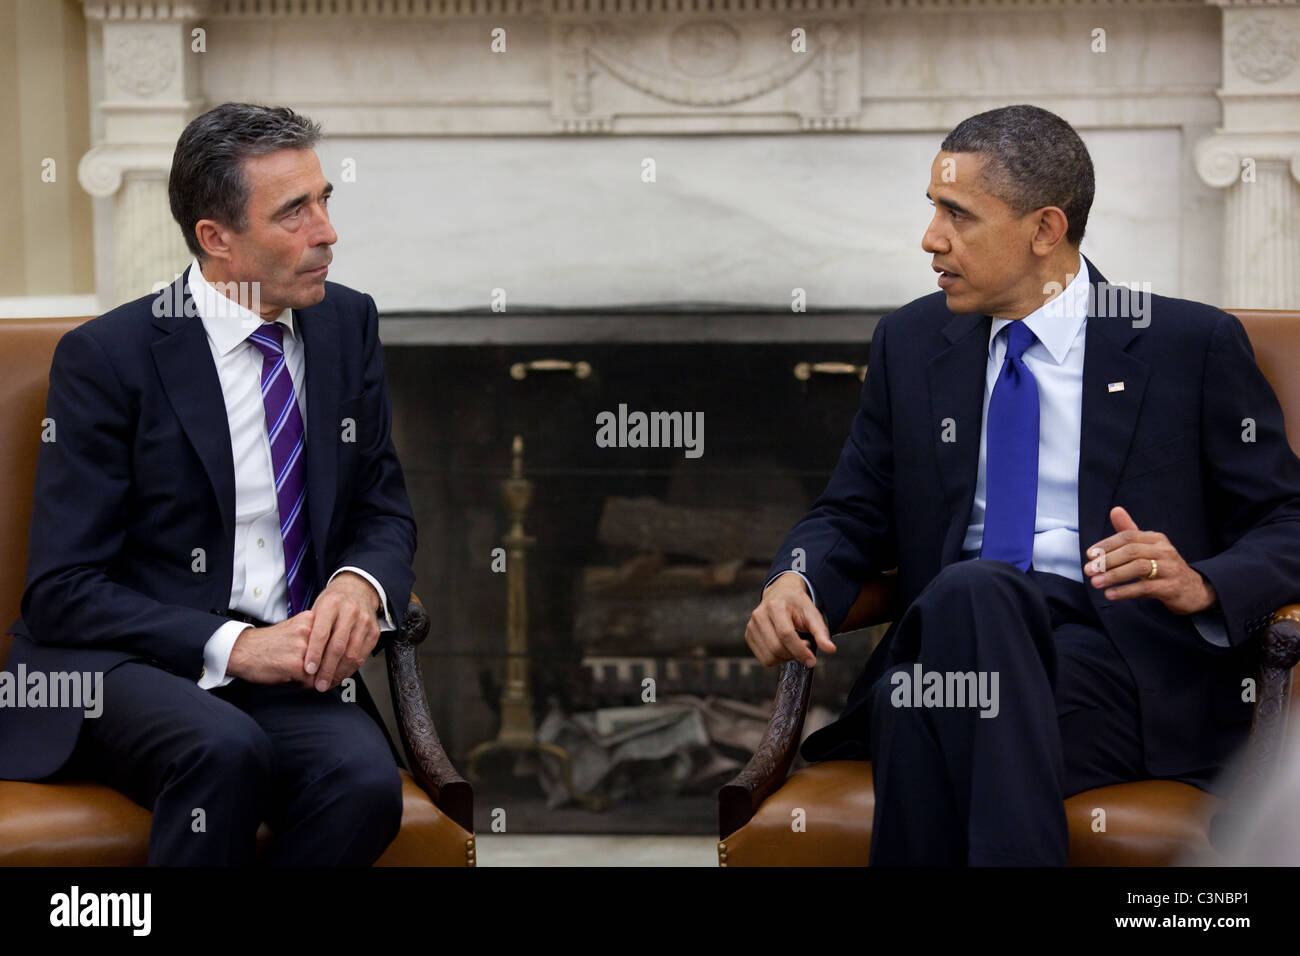 President Barack Obama meets with NATO Secretary General Anders Fogh Rasmussen in the Oval Office, May 13, 2011. Stock Photo